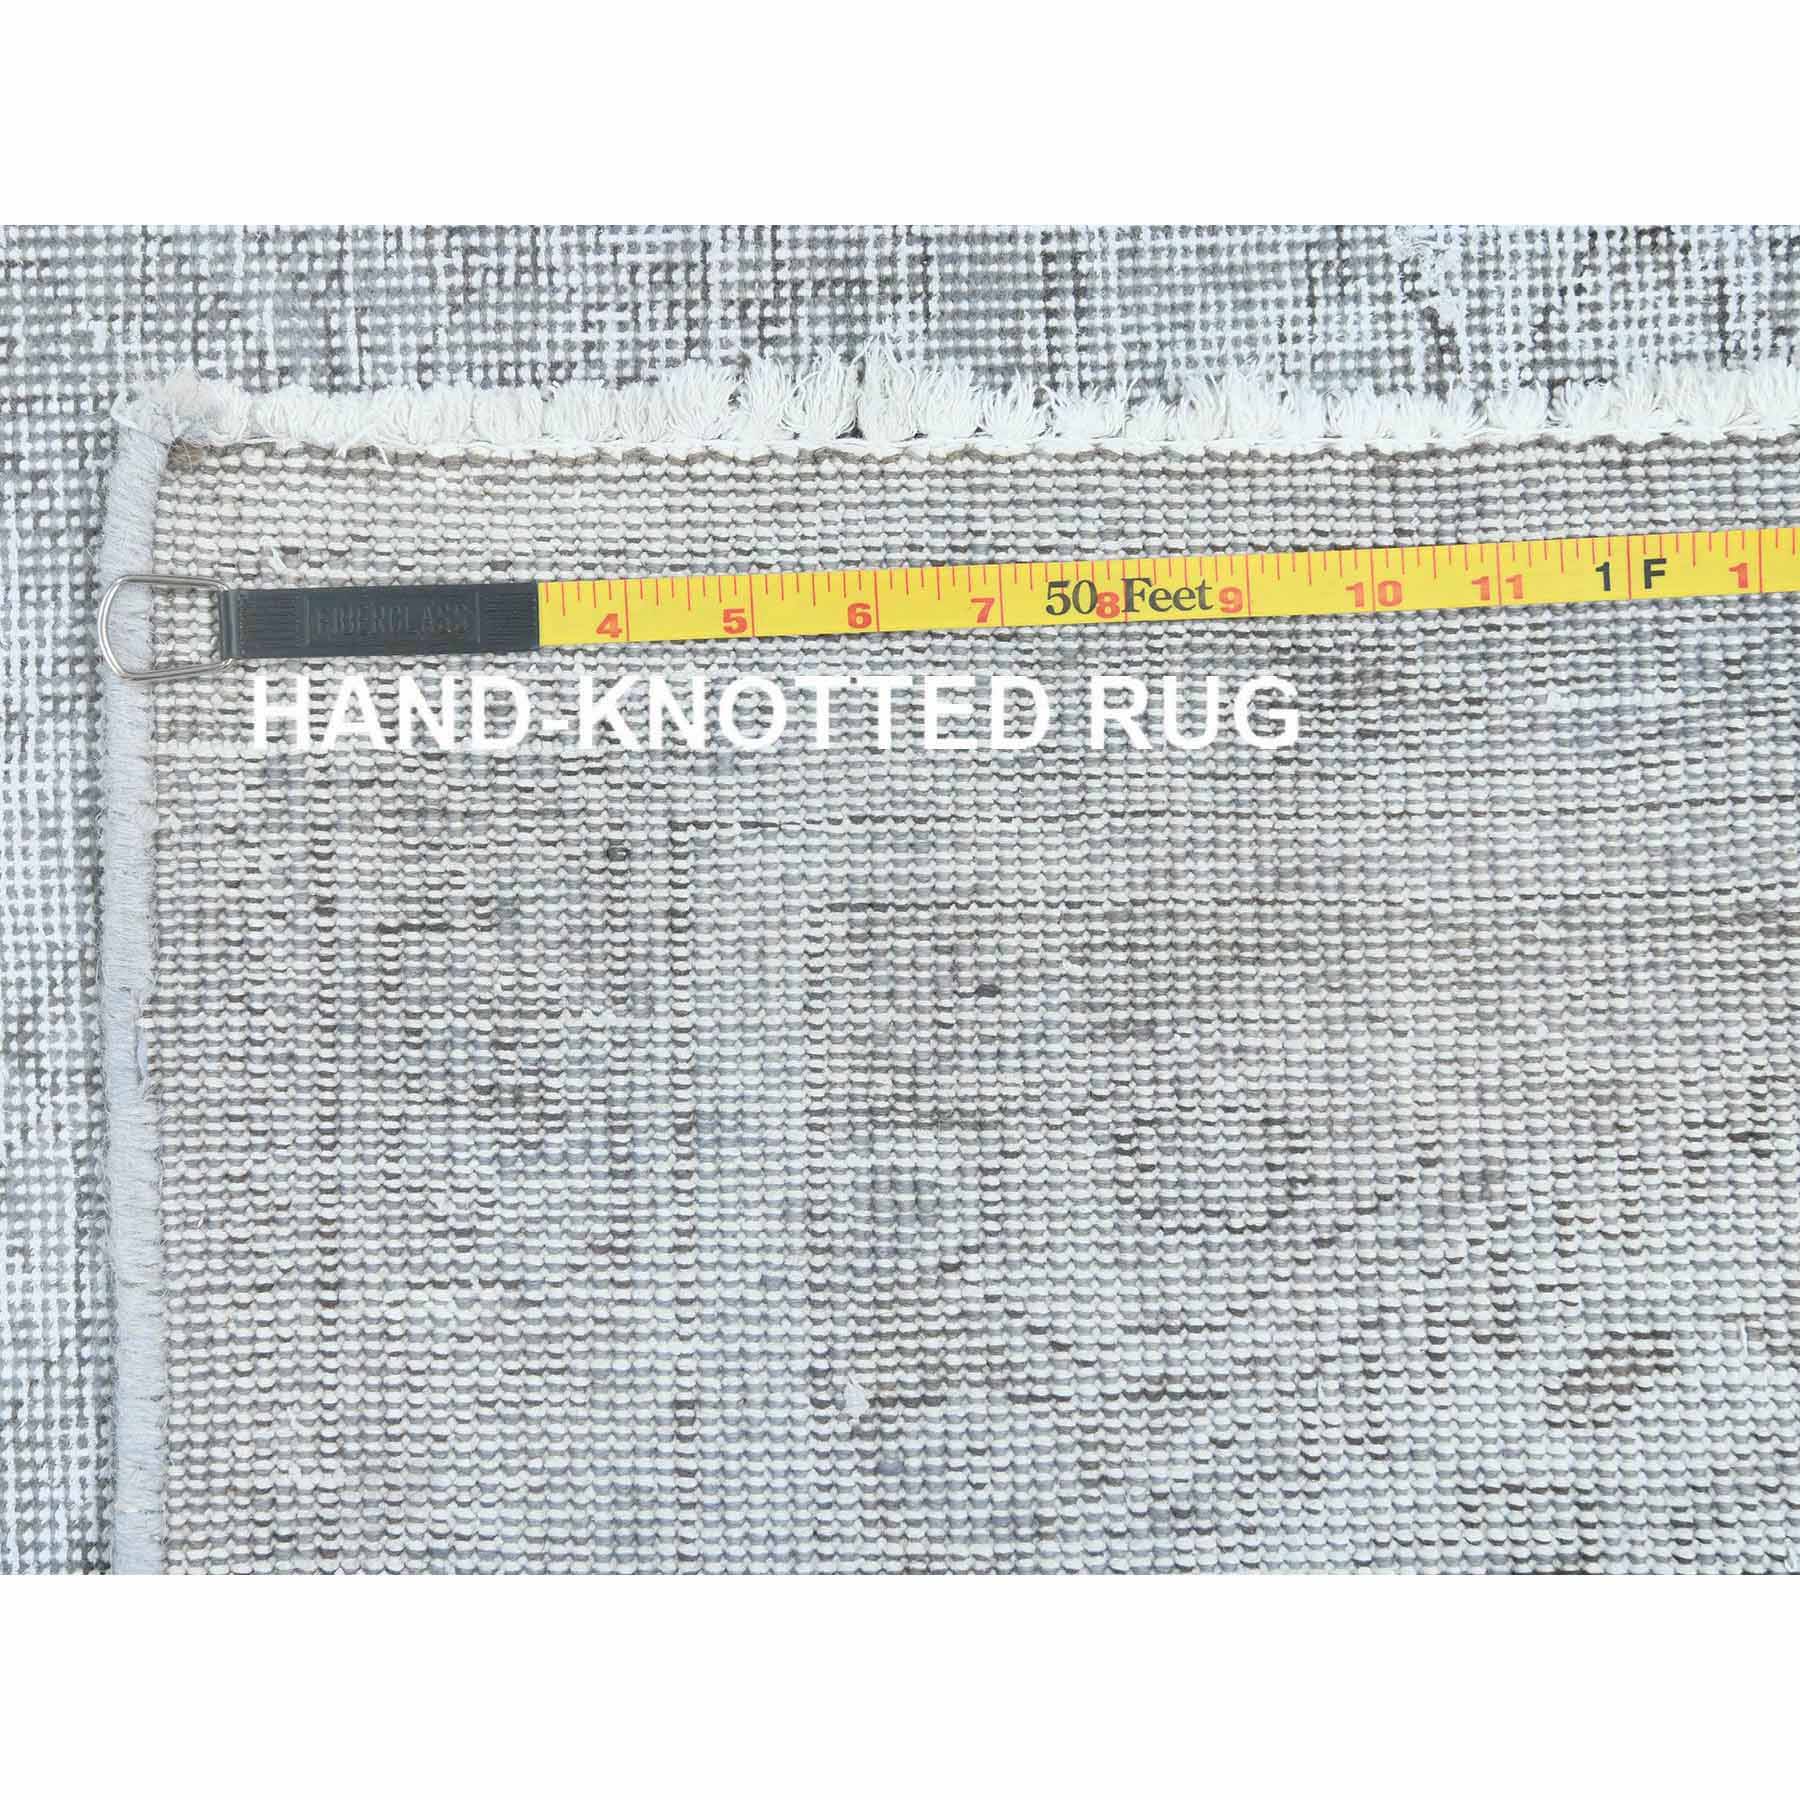 Overdyed-Vintage-Hand-Knotted-Rug-410525